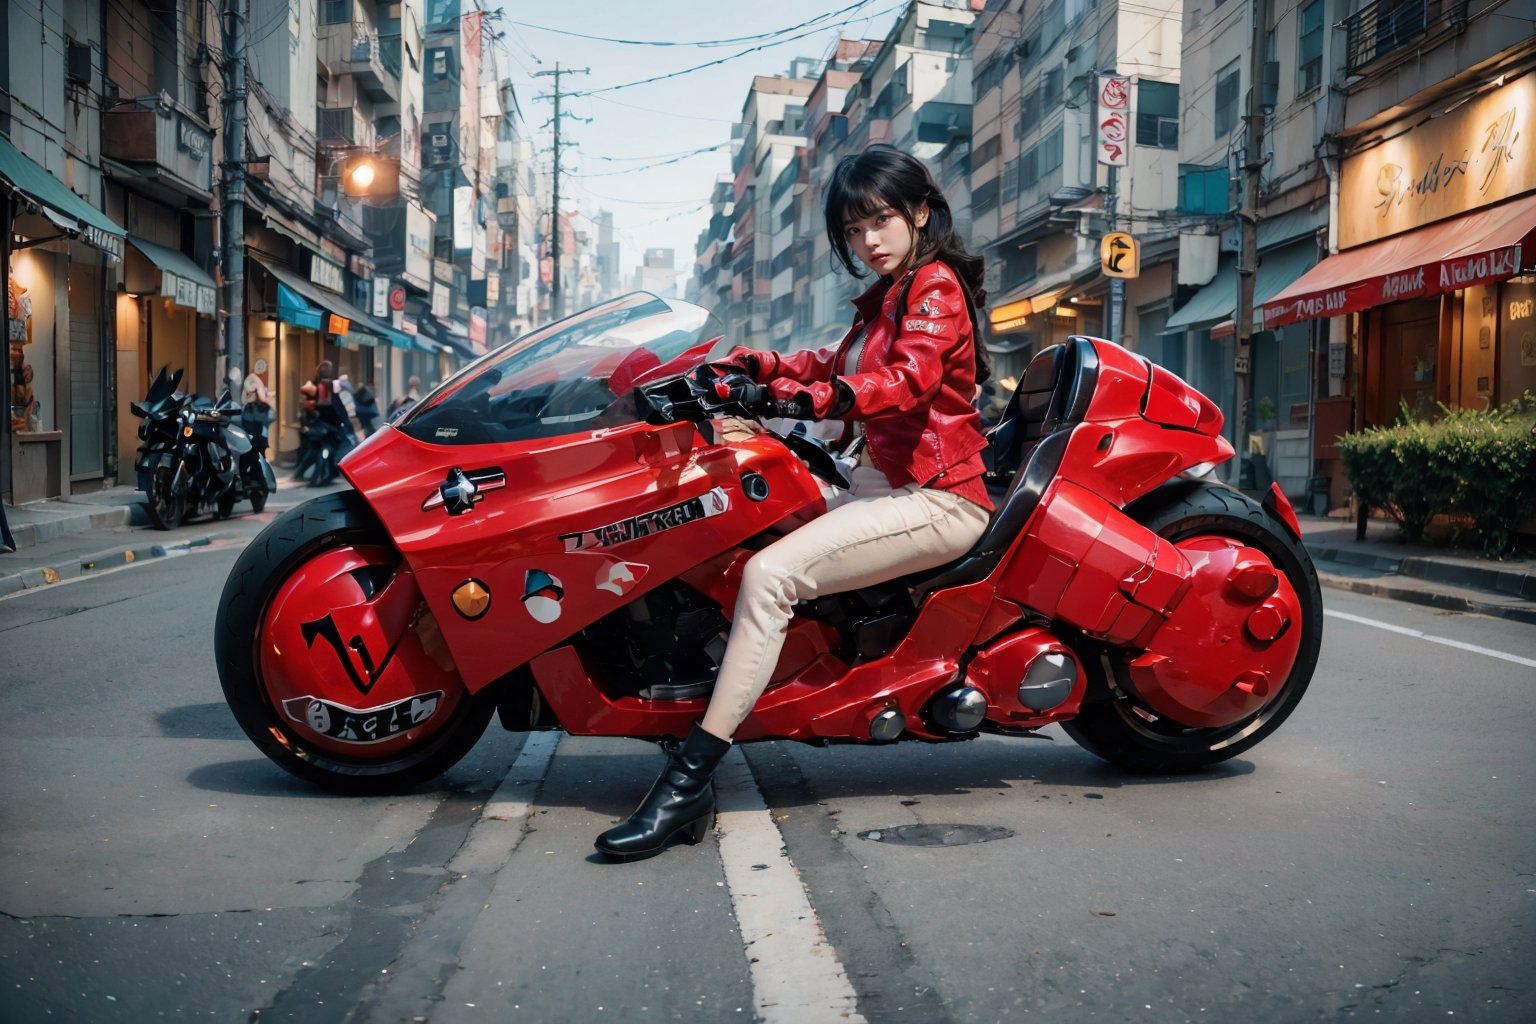 (Realistic, Photorealistic: 1.3), Original, Masterpiece, 16K, High Contrast, (Highest Resolution Illustration), Photorealistic: 1.3, Side Light, ((Exquisite Details and Textures)), Cinematic Shot, Ultra Realistic Photo, Siena Natural Proportions, Full Body View, ((Long White Hair, Bangs)), ((1 Girl on a Blue Motorcycle, Wearing a Tight Red and White Leather Jacket)), Detailed Face, Abdomen, ((Kaneda Motorcycle in Perfect Detail)), (AKIRA), Cyberpunk City at Night, ((Futuristic)), sprbk